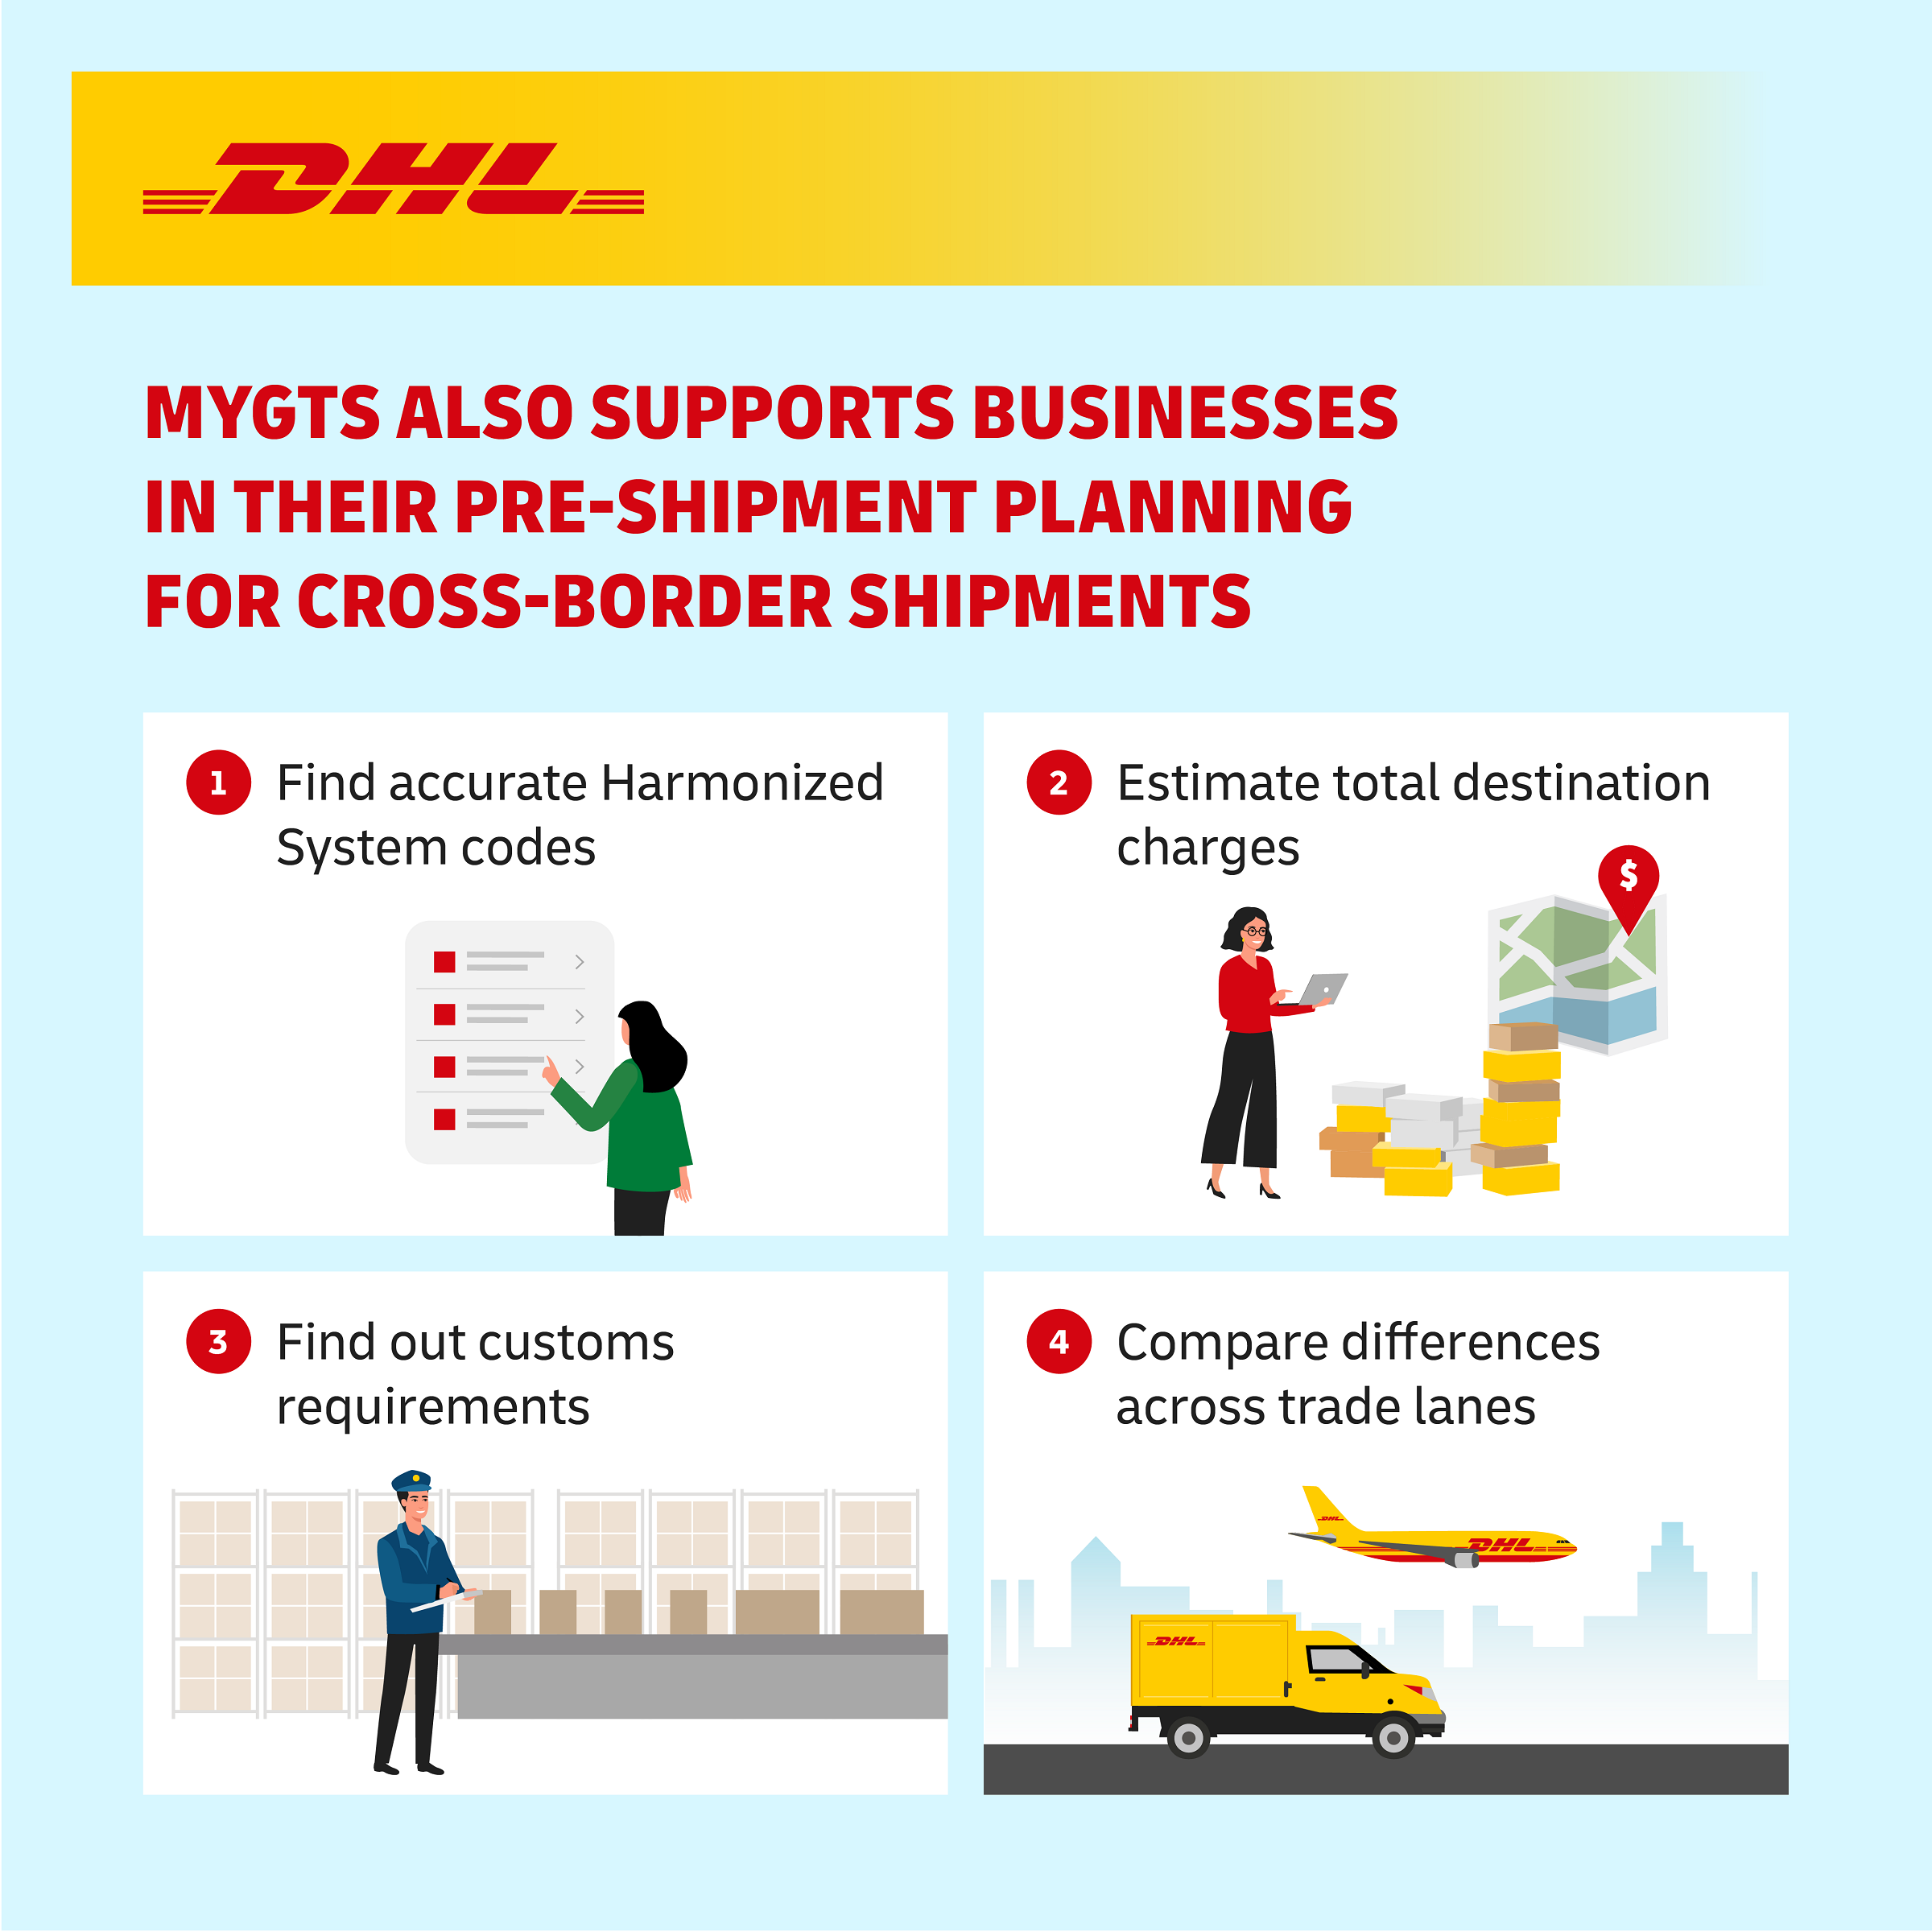 MyGTS also supports businesses in their pre-shipment planning for cross-border shipments